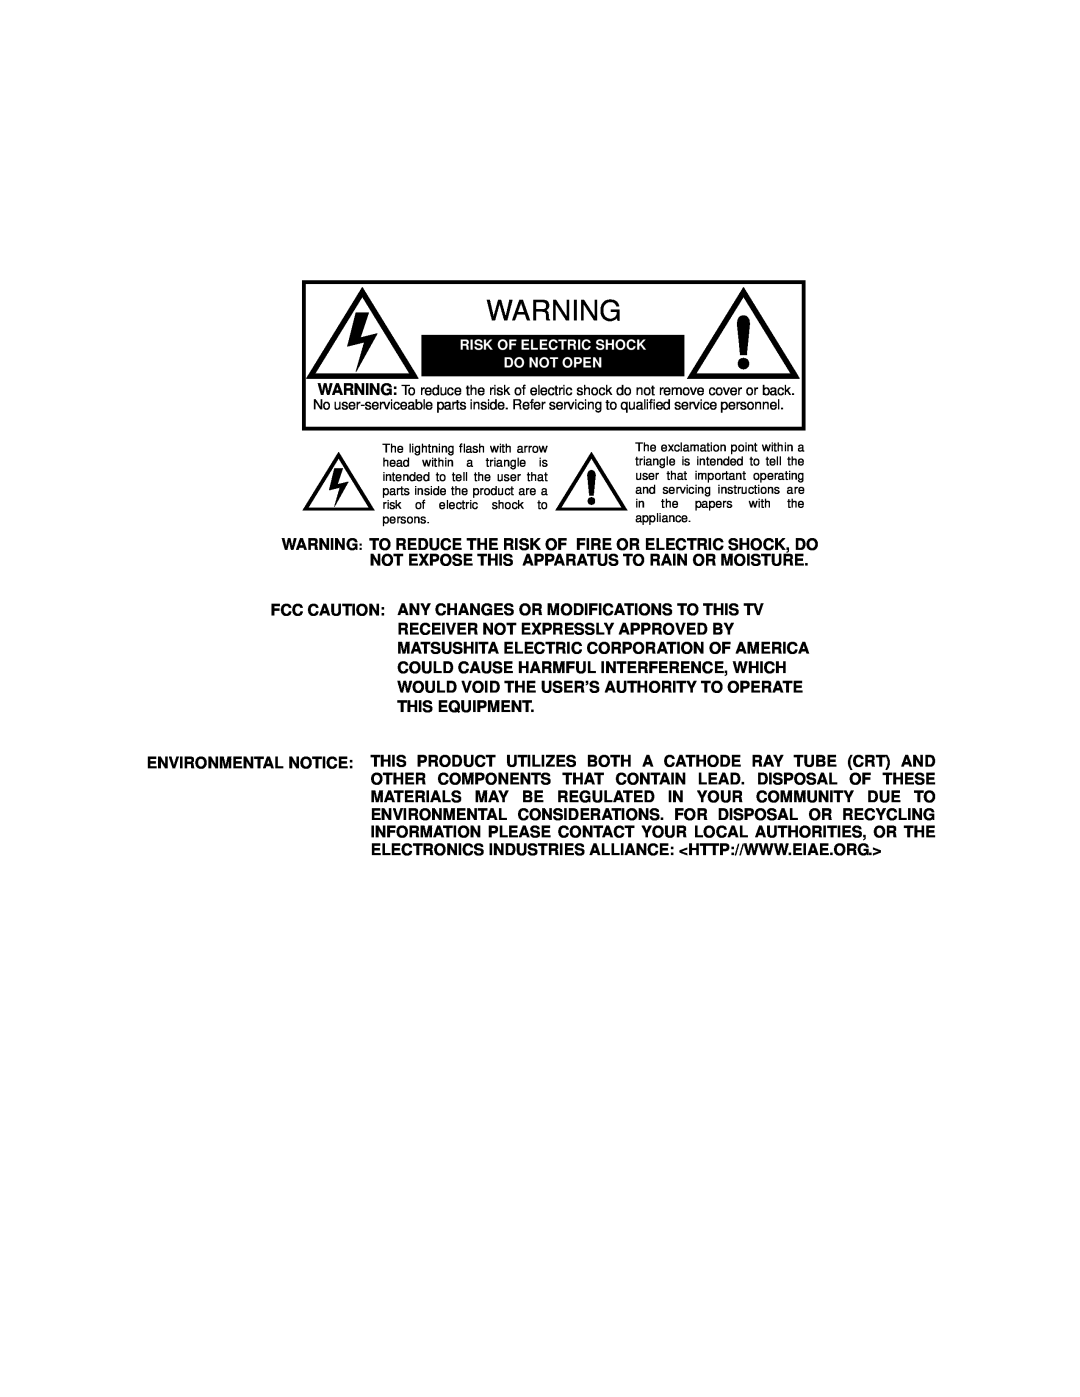 Panasonic CT 27SX12, CT 24SX12 manuel dutilisation Warning To Reduce The Risk Of Fire Or Electric Shock, Do 